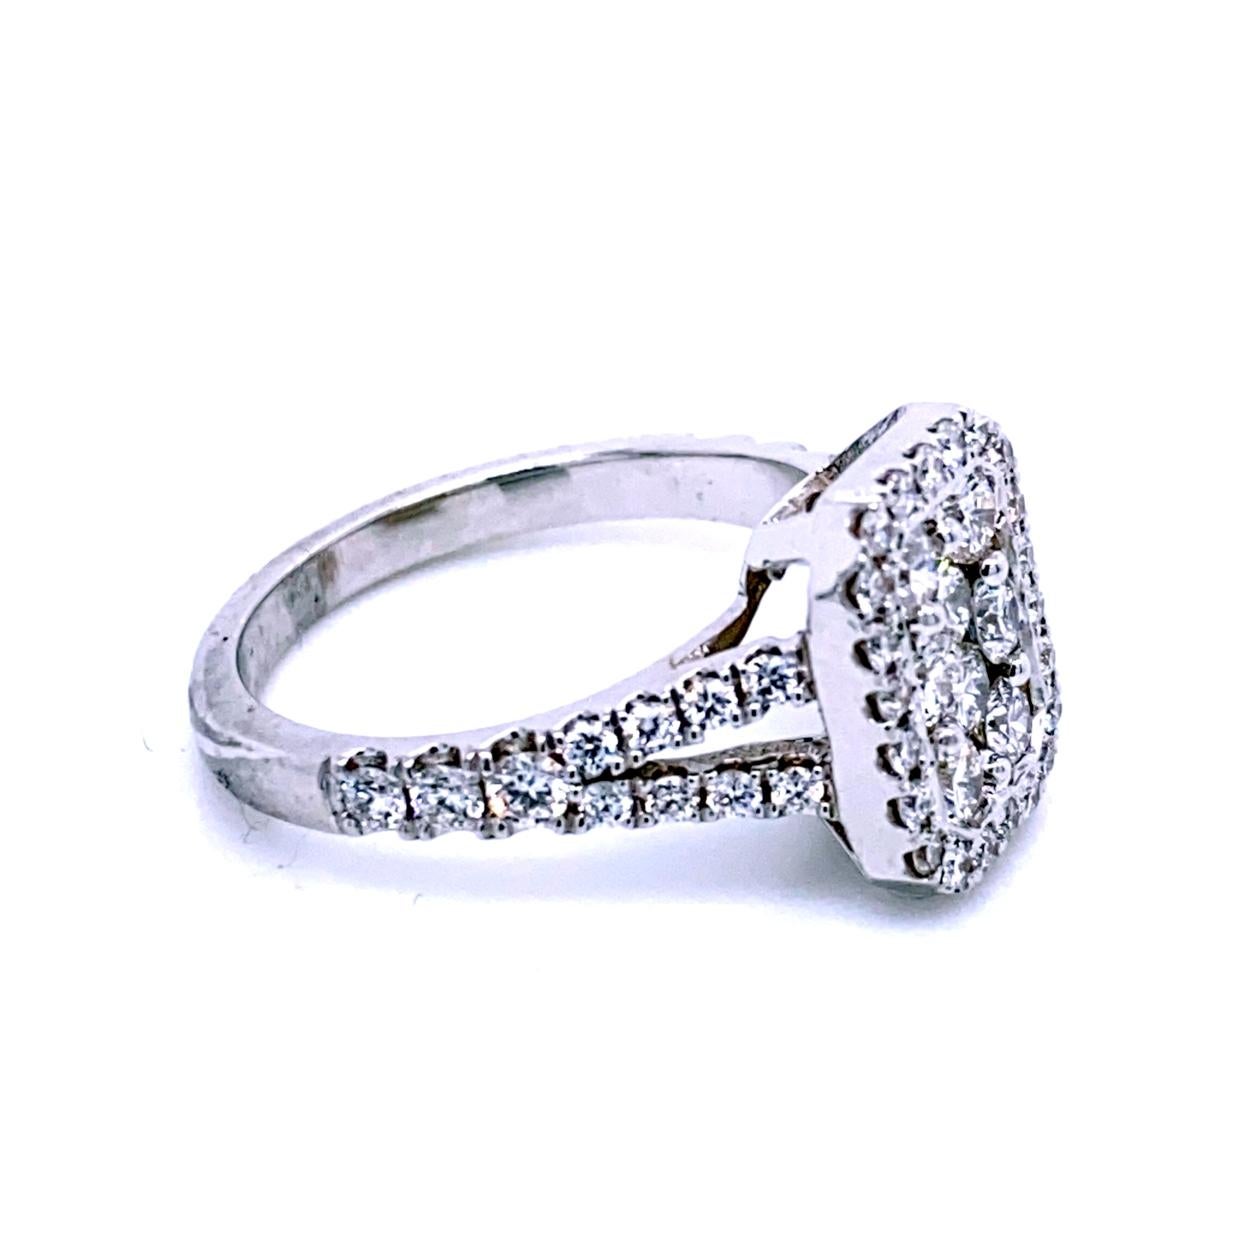 This beautiful Split Shank Diamond Engagement Ring with Halo has a rectangular center wet with a cluster of round diamonds (Size 6.5x8.0 mm Equivalent to a 2 Ct Radiant). Total diamond weight of 1.07 Ct.

Center dimensions 6.5 mm x 8.0 mm 
Total